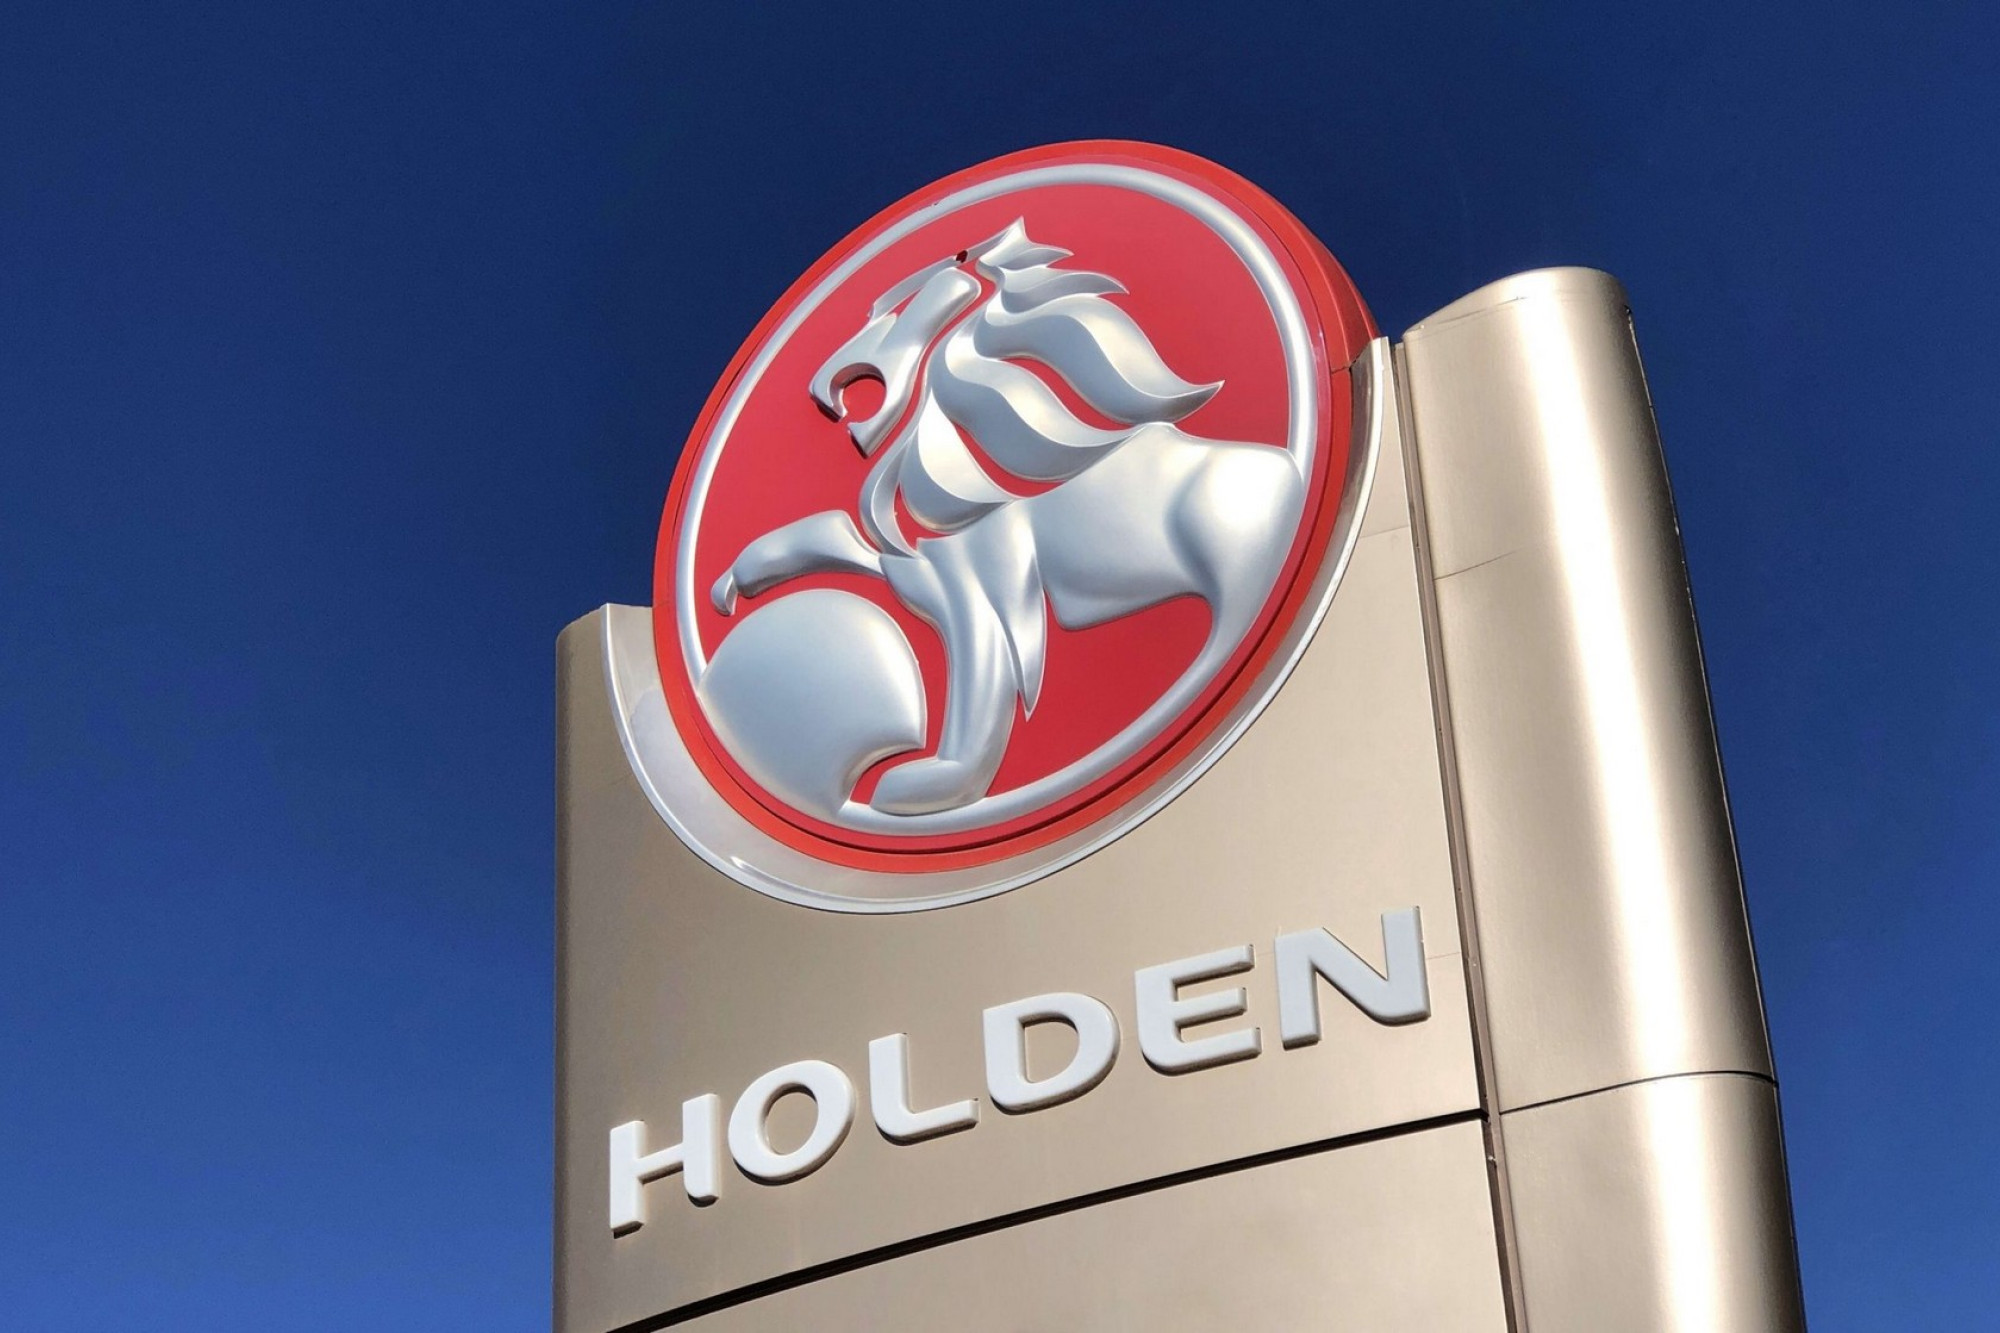 Local Holden dealer says "we are here to stay" - feature photo